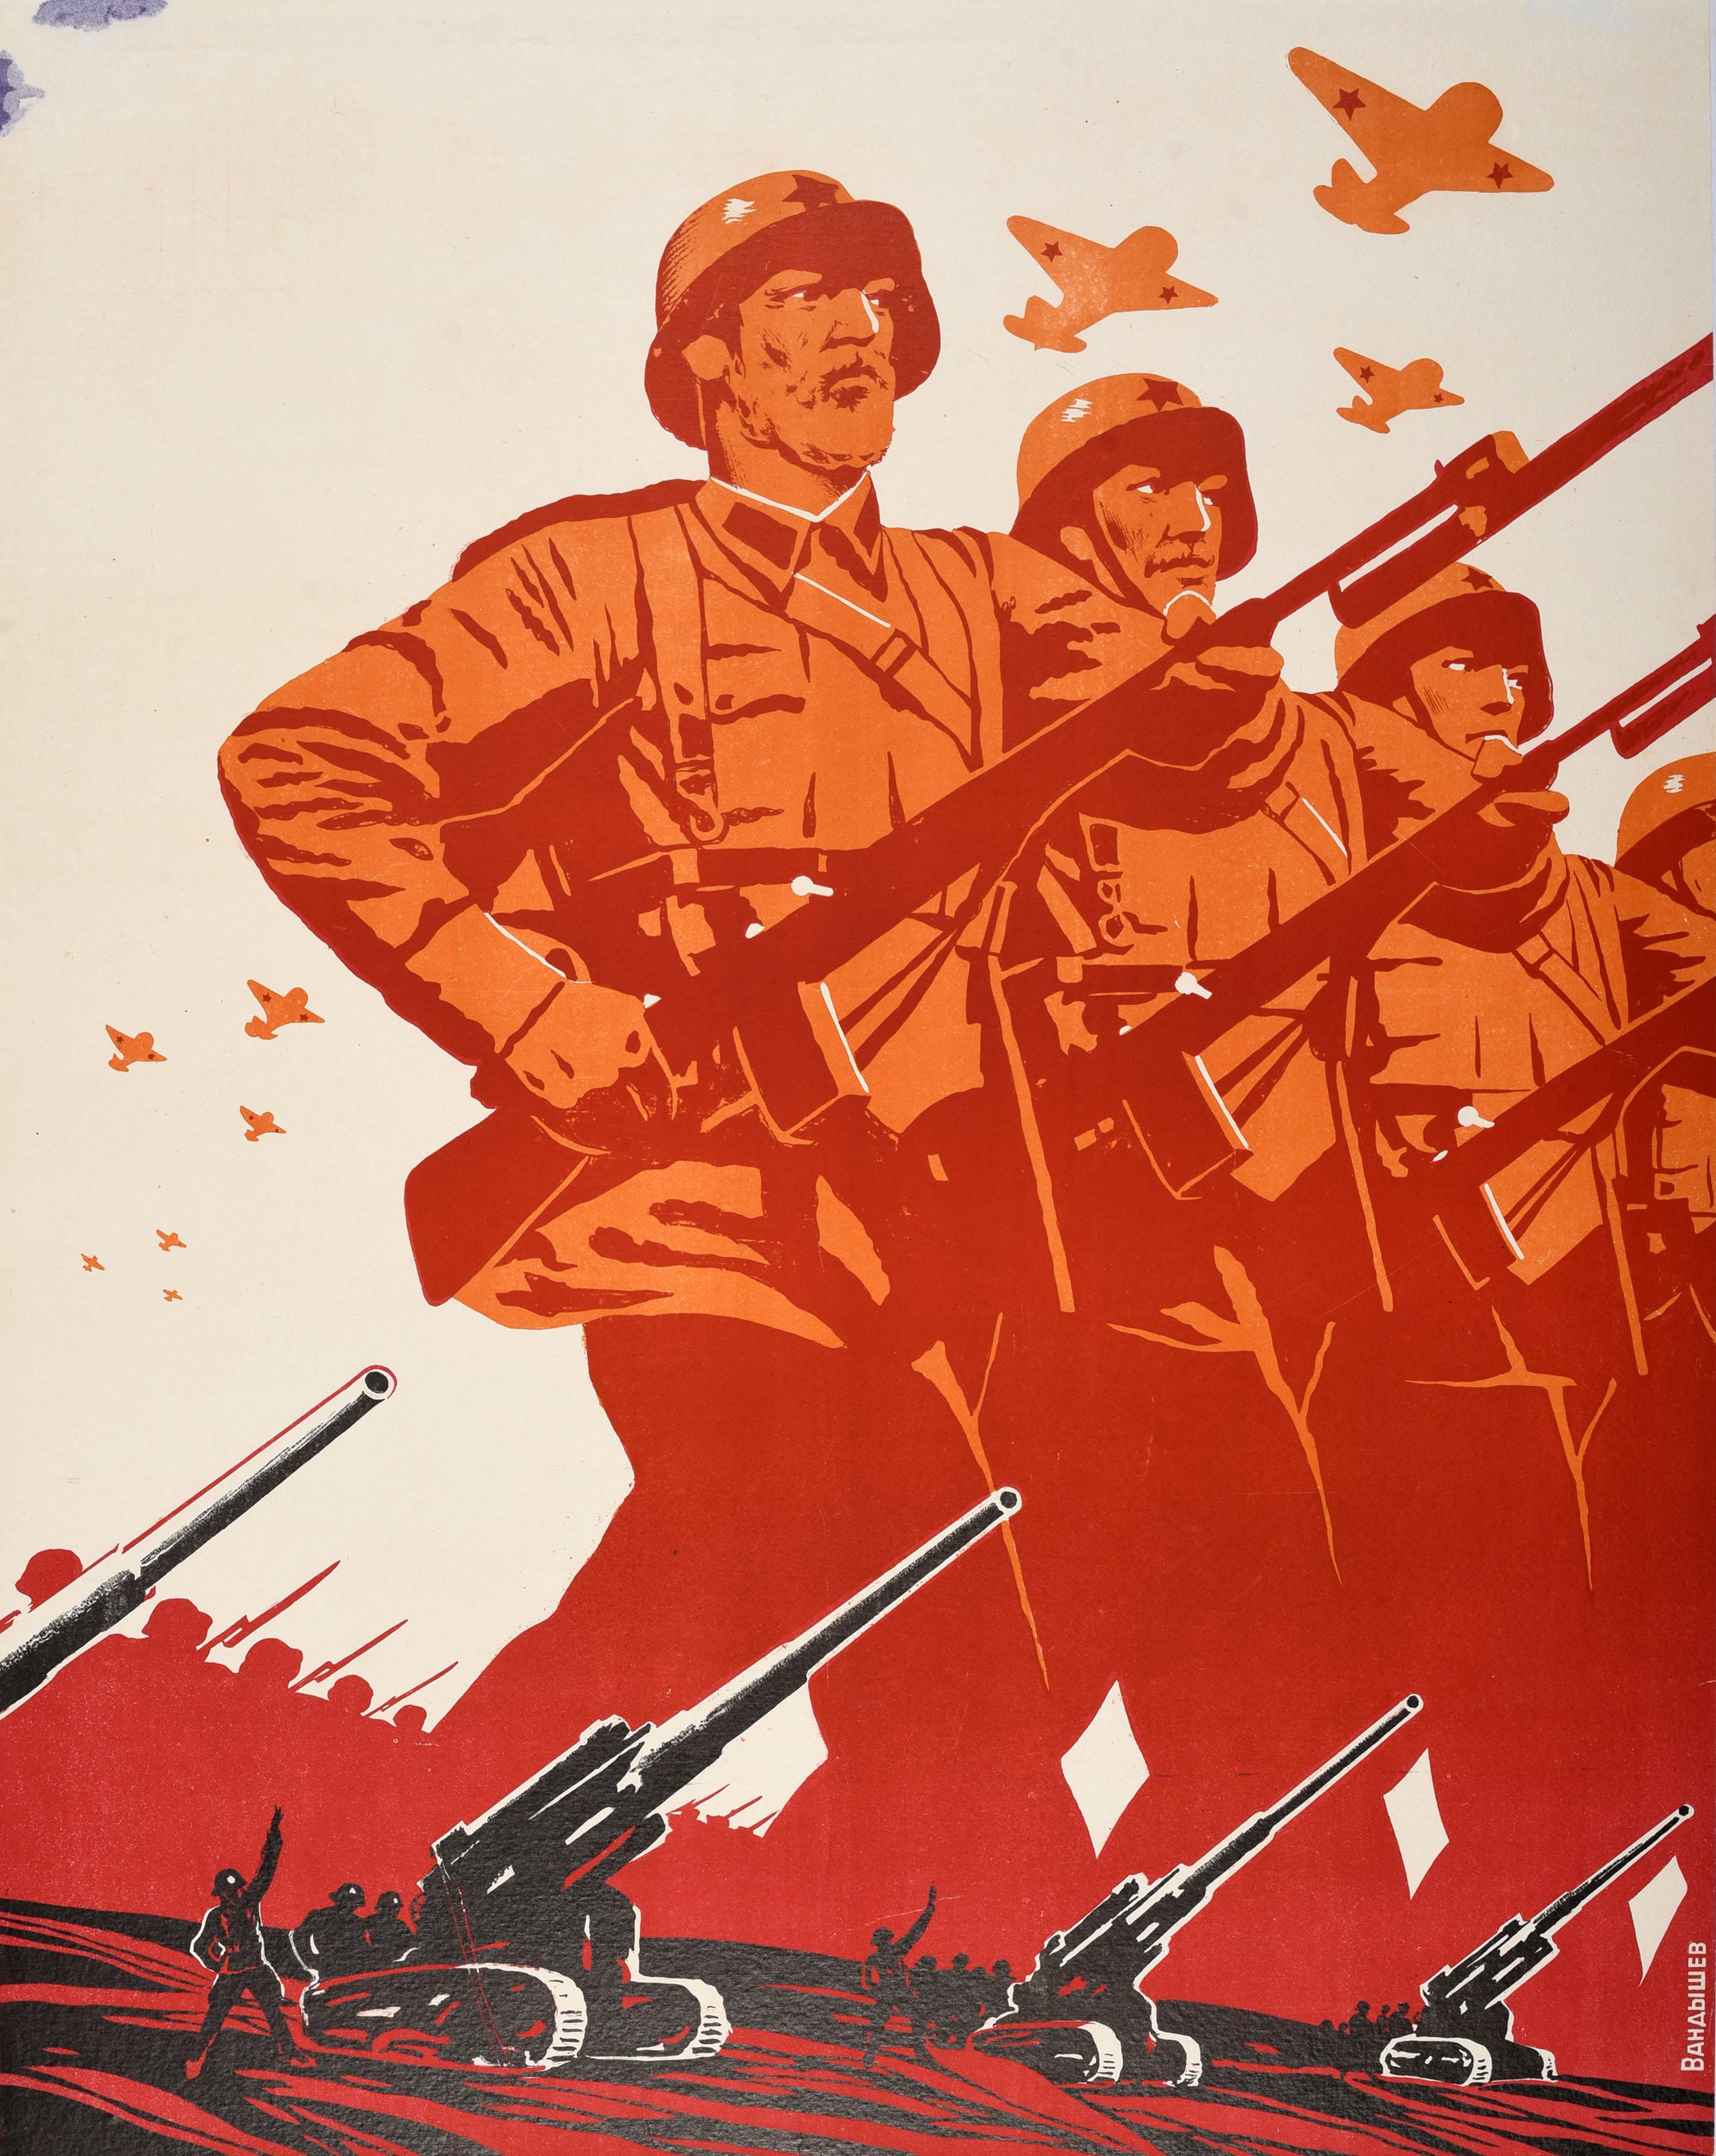 Original vintage Soviet World War Two propaganda poster - For the Defence of the Motherland / На Защиту Родины - featuring a dynamic design depicting Red Army soldiers marching in line in uniform with red USSR stars on their helmets and carrying